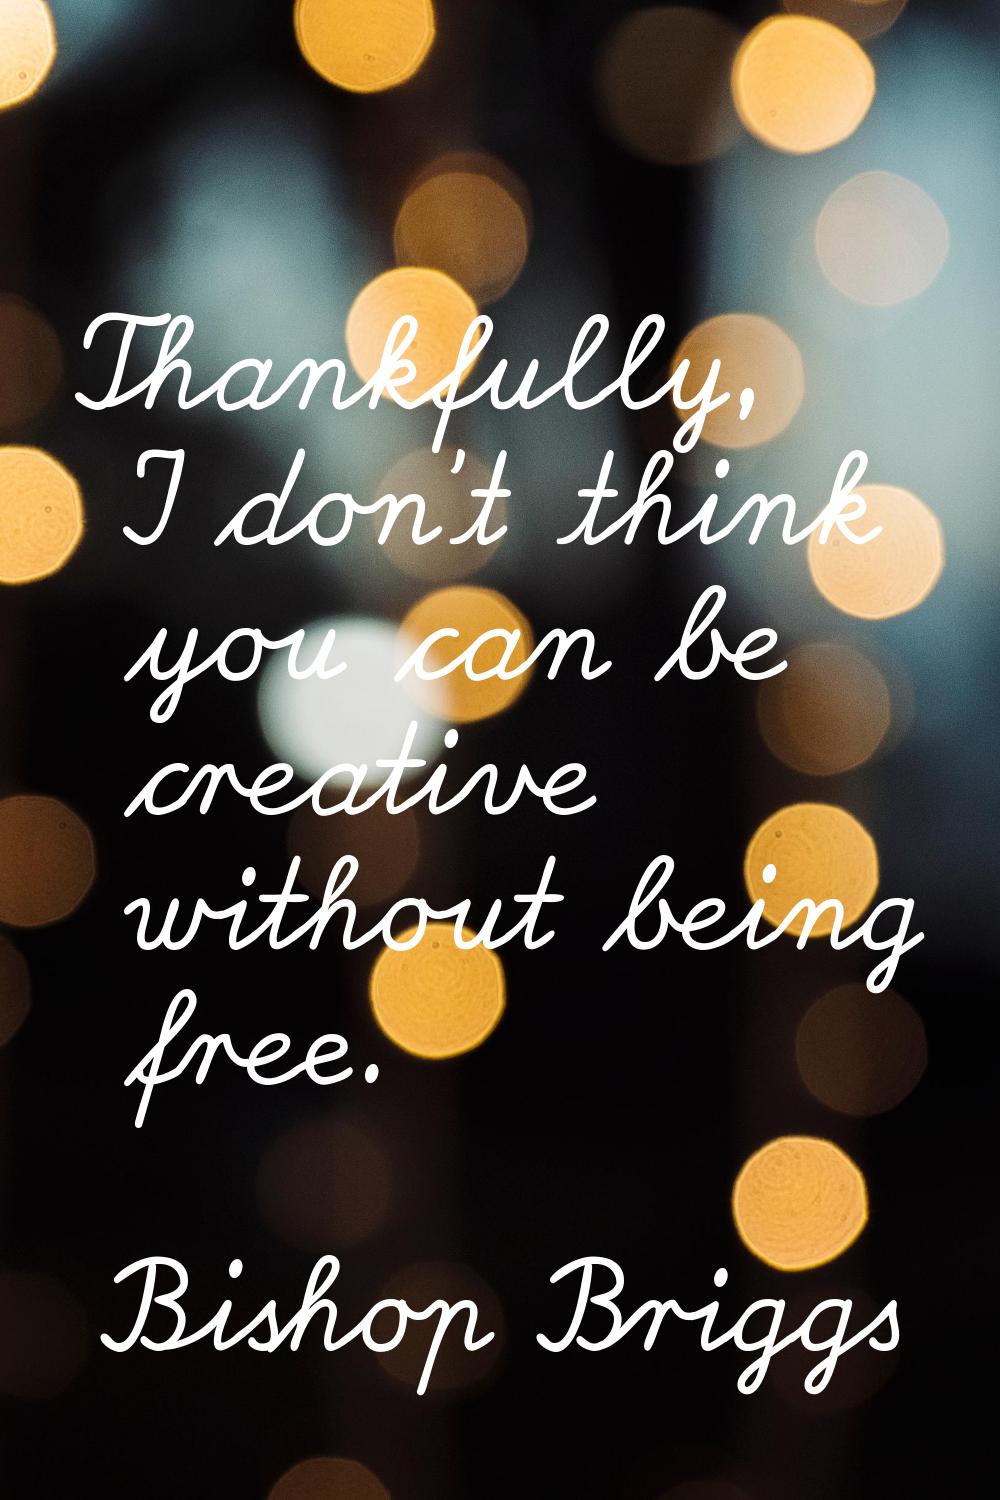 Thankfully, I don't think you can be creative without being free.